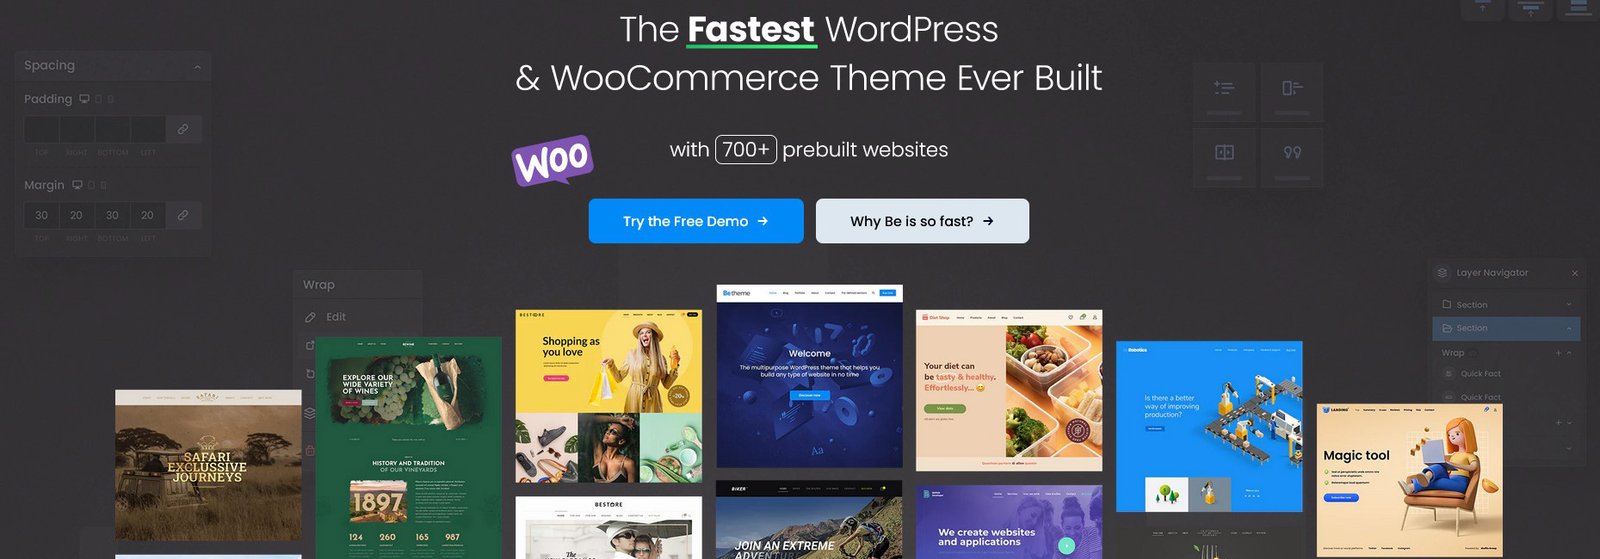 Evaluate the WordPress Theme Demo and Features